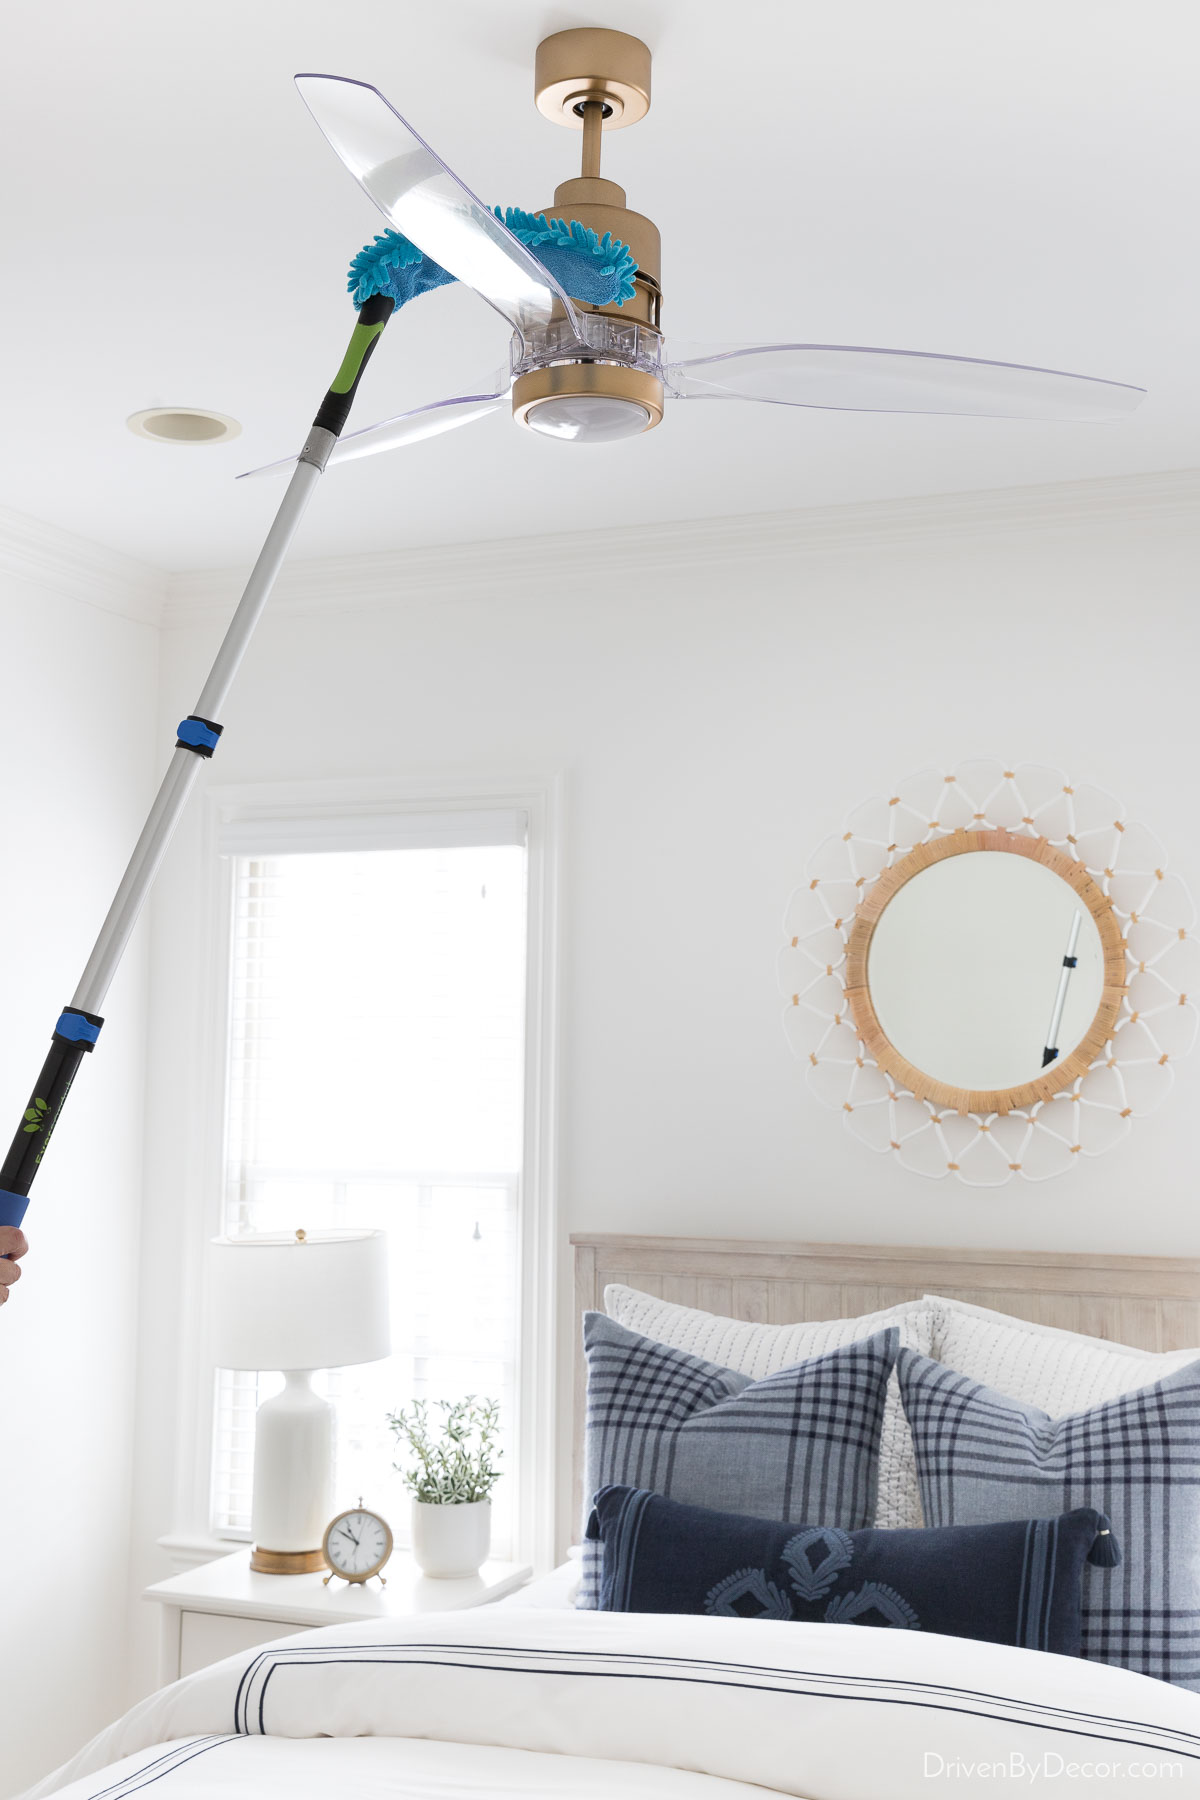 12 Cleaning Tools to Get Your Home Cleaner Faster - Driven by Decor